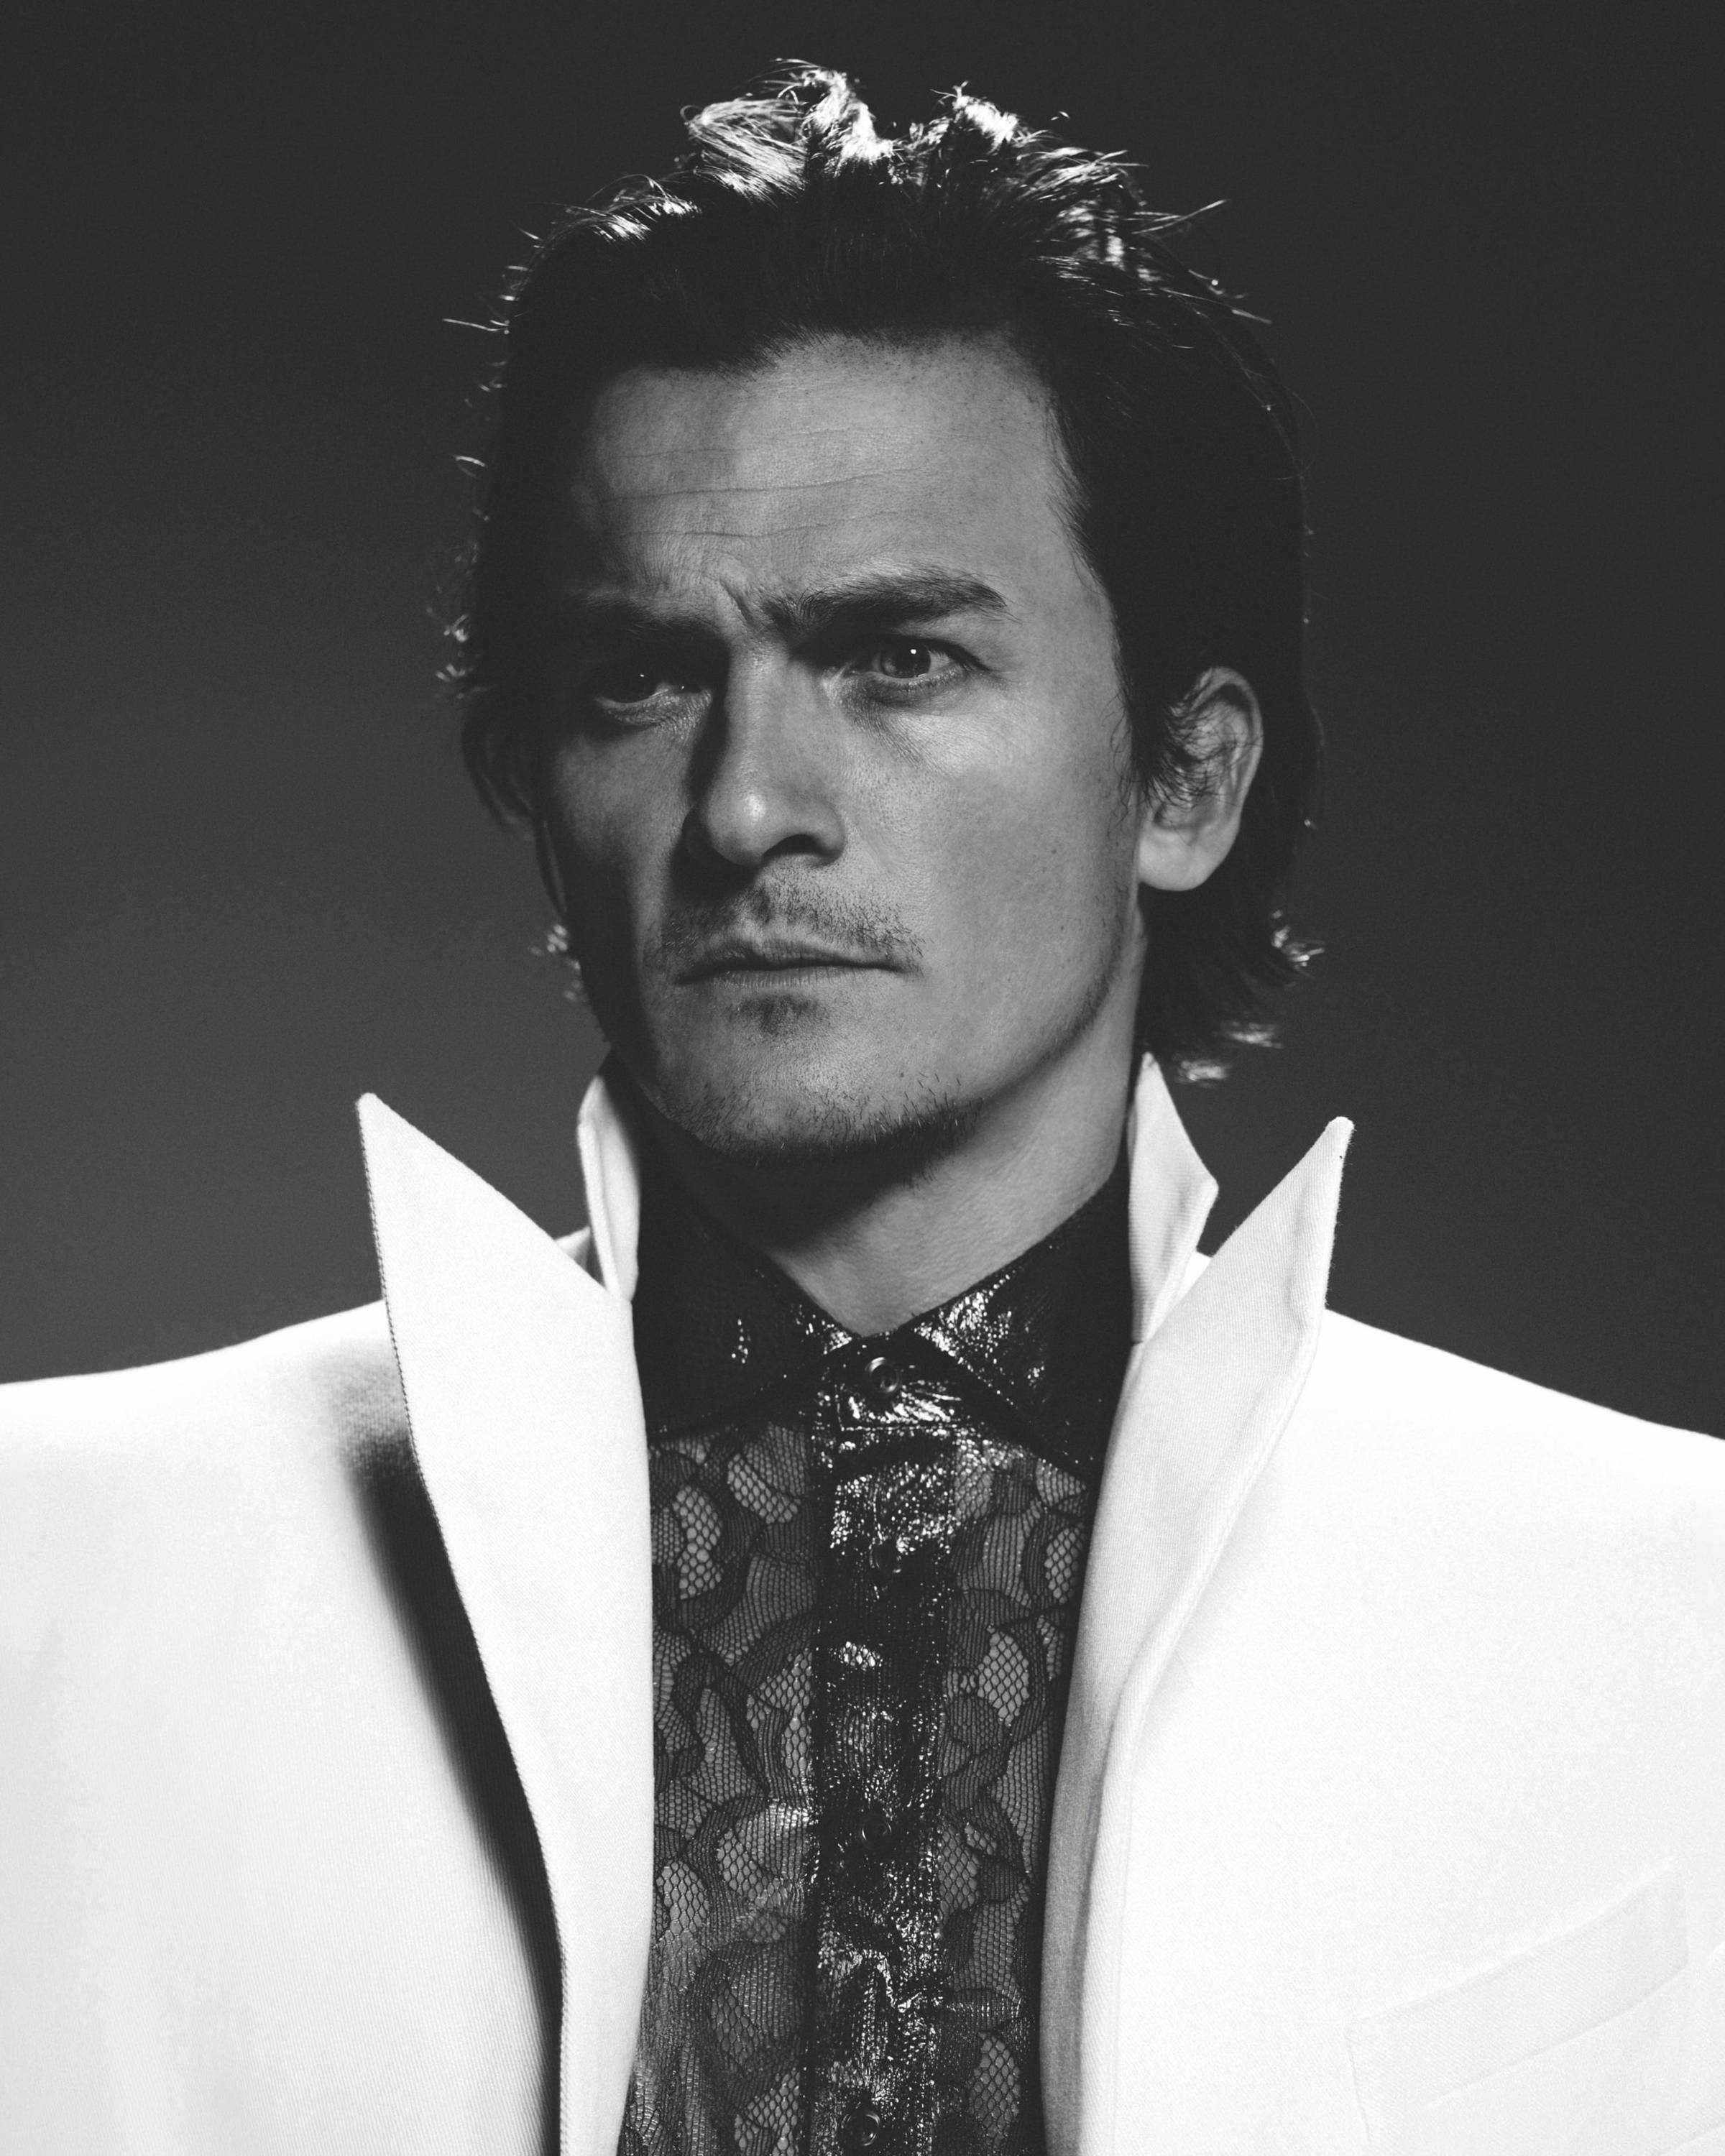 Rupert Friend is set to dominate screens this year, from Netflix’s Anatomy Of A Scandal to The Inquisitor in the highly-anticipated return to the Star Wars universe with the mini-series, Obi-Wan Kenobi. Ewan McGregor catches up with his latest co-star to chat on the metamorphic – and sometimes outrightly grotesque – power of prosthetics and the importance of being present.